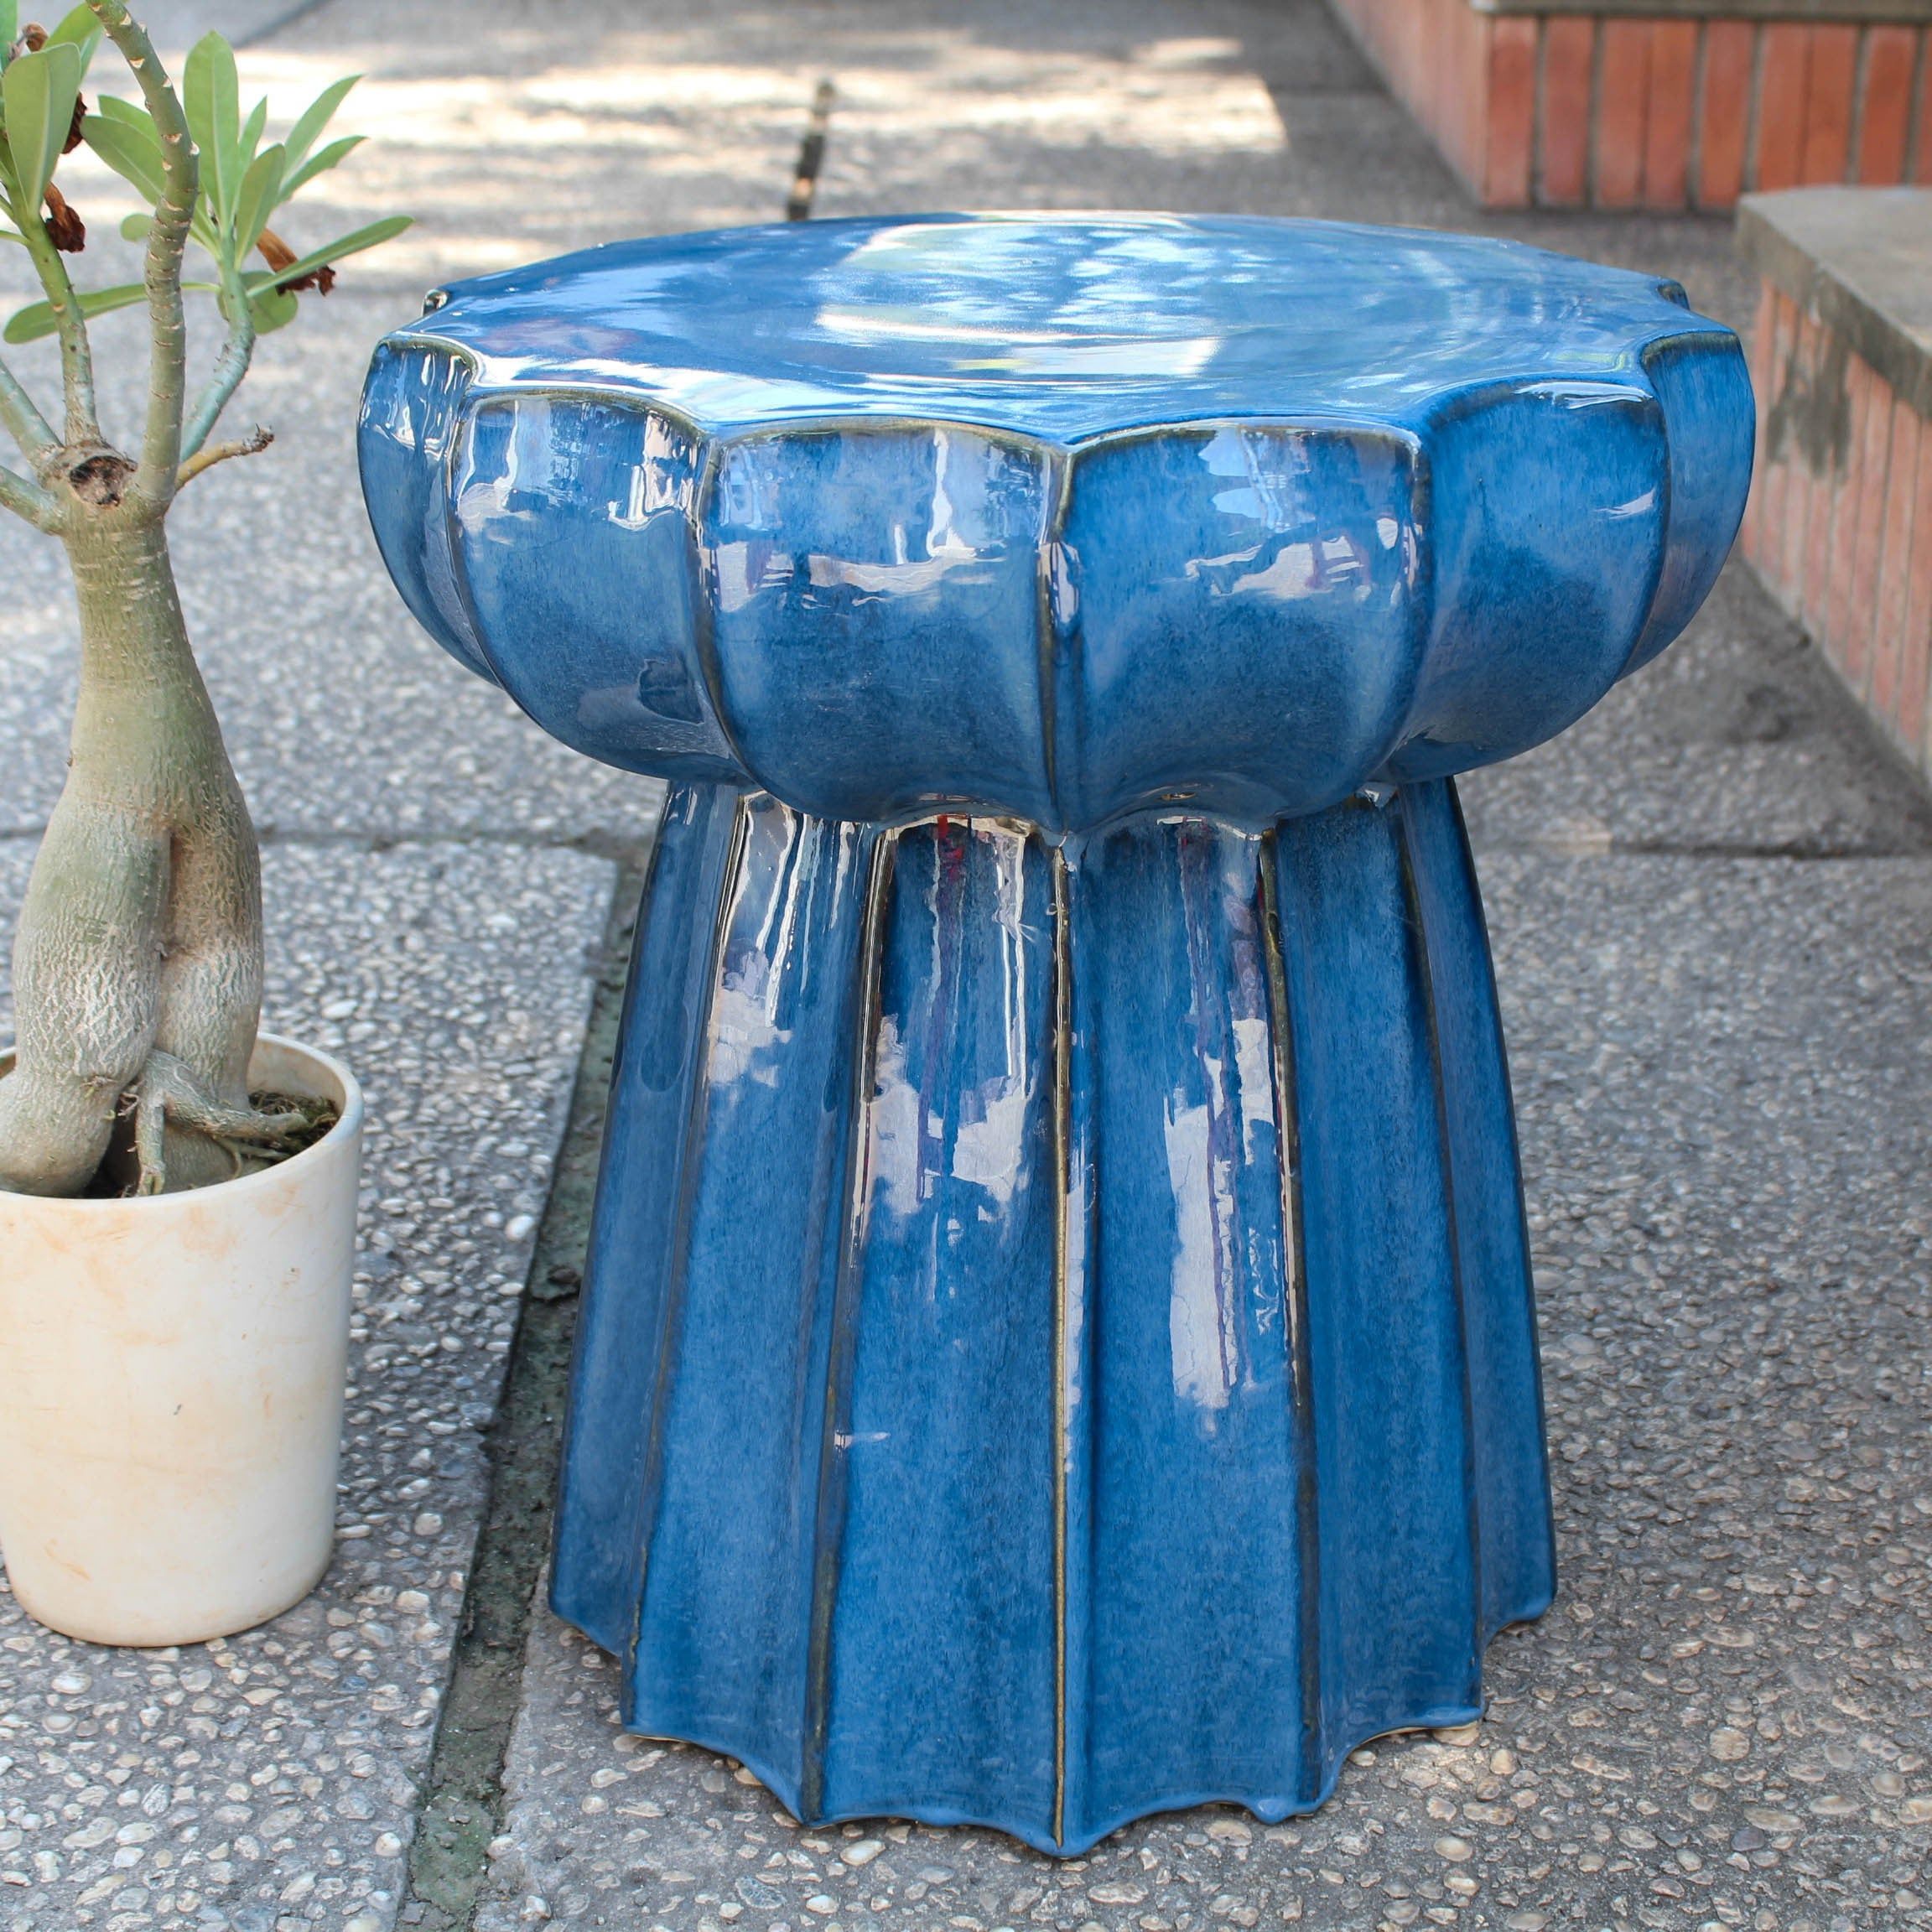 The Versatile and Stylish Garden Stool: A Must-Have Accessory for Your Outdoor Space